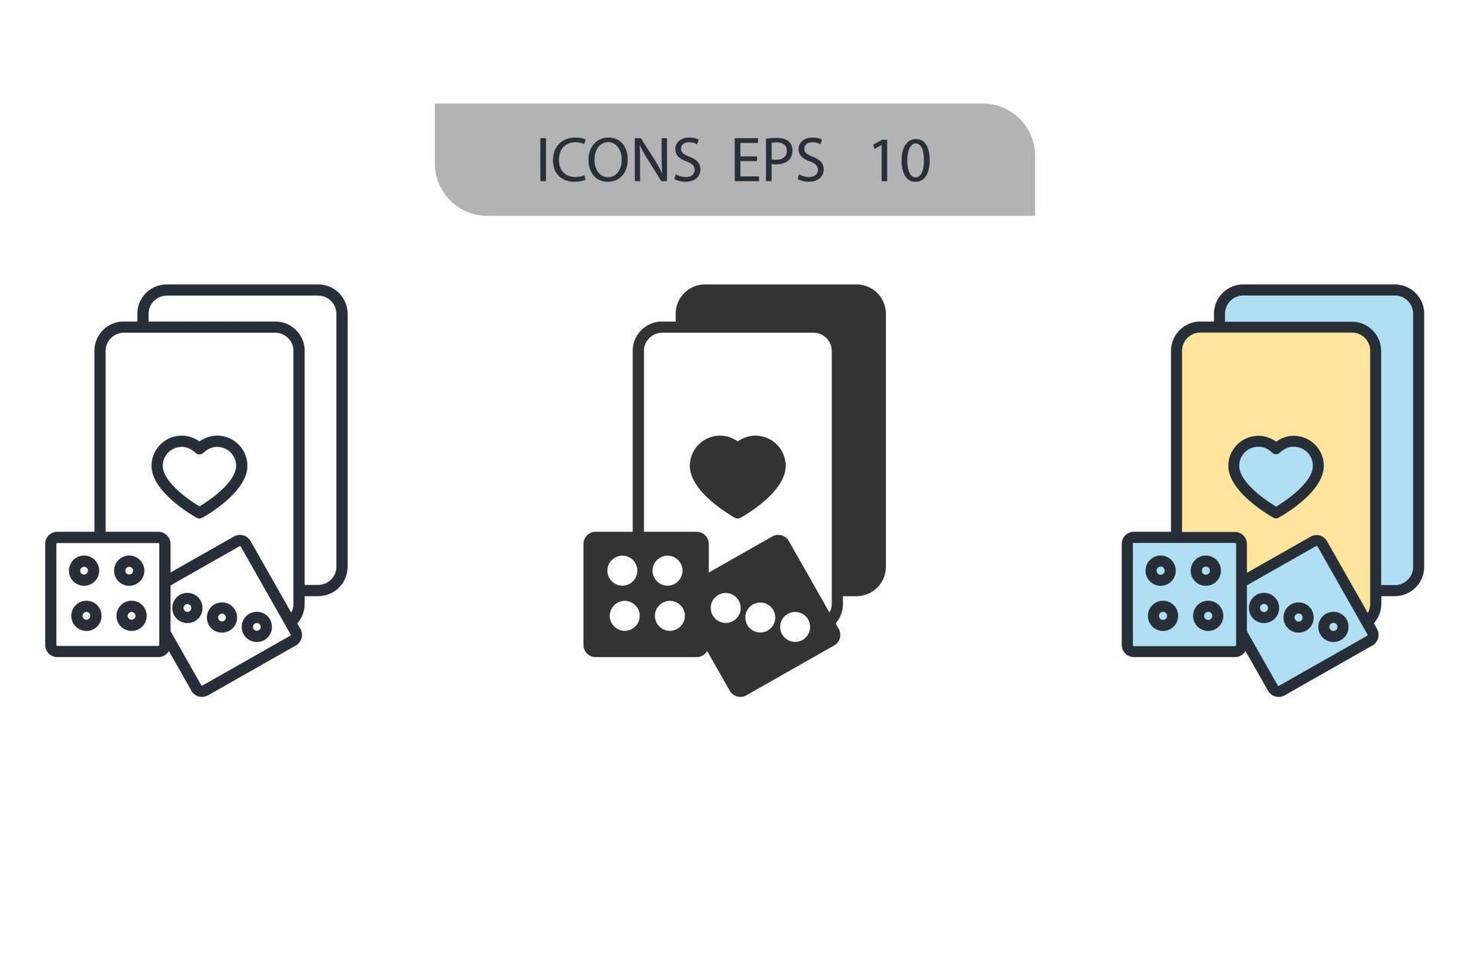 Casino icons  symbol vector elements for infographic web